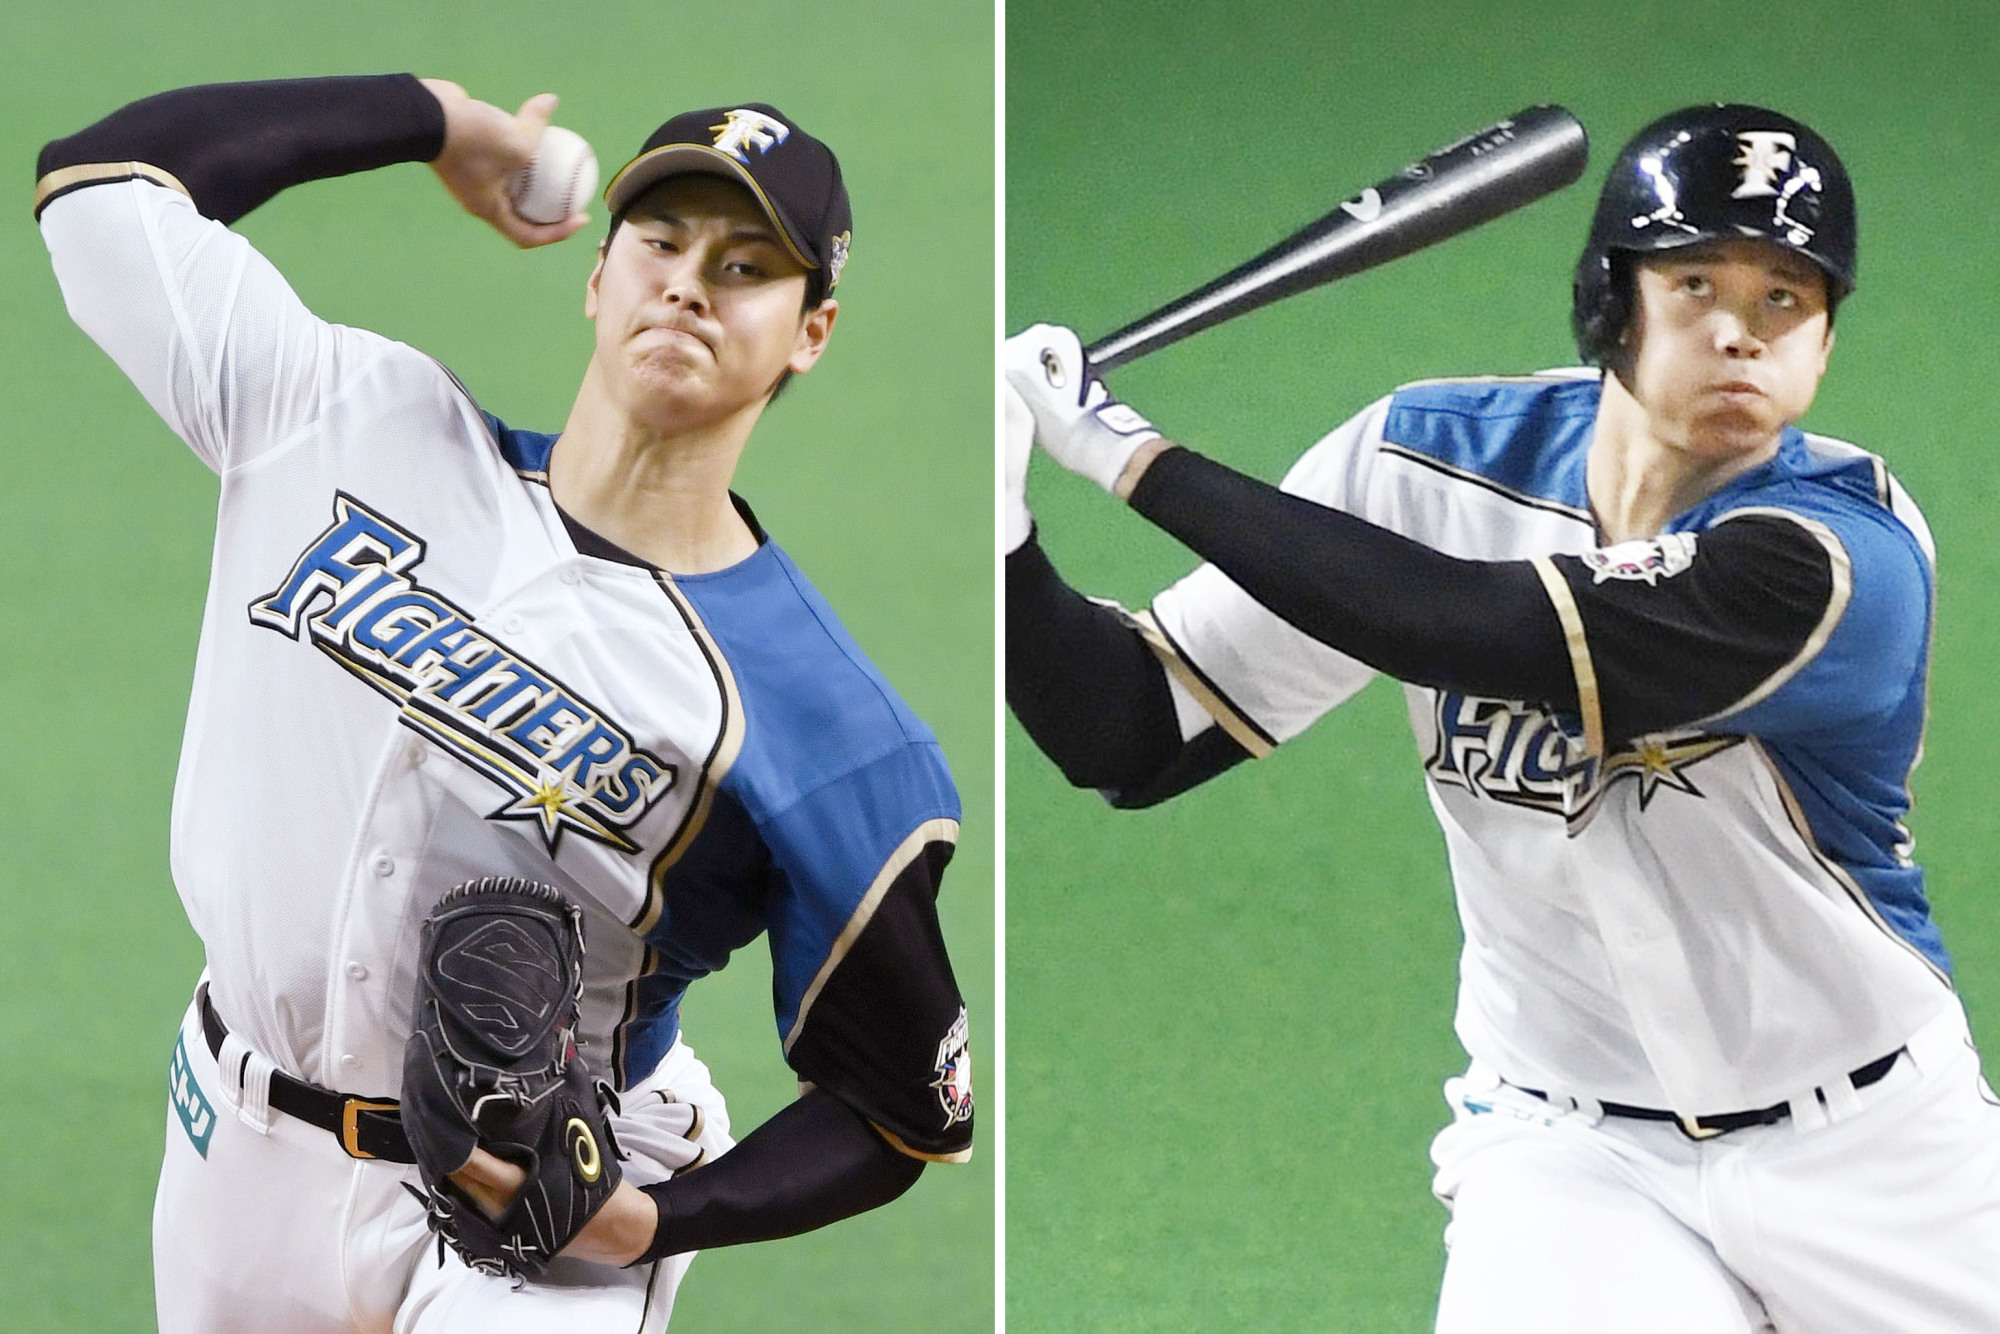 Shohei Otani became the first pitcher to be named to the PL Best Nine team as a designated hitter. | KYODO